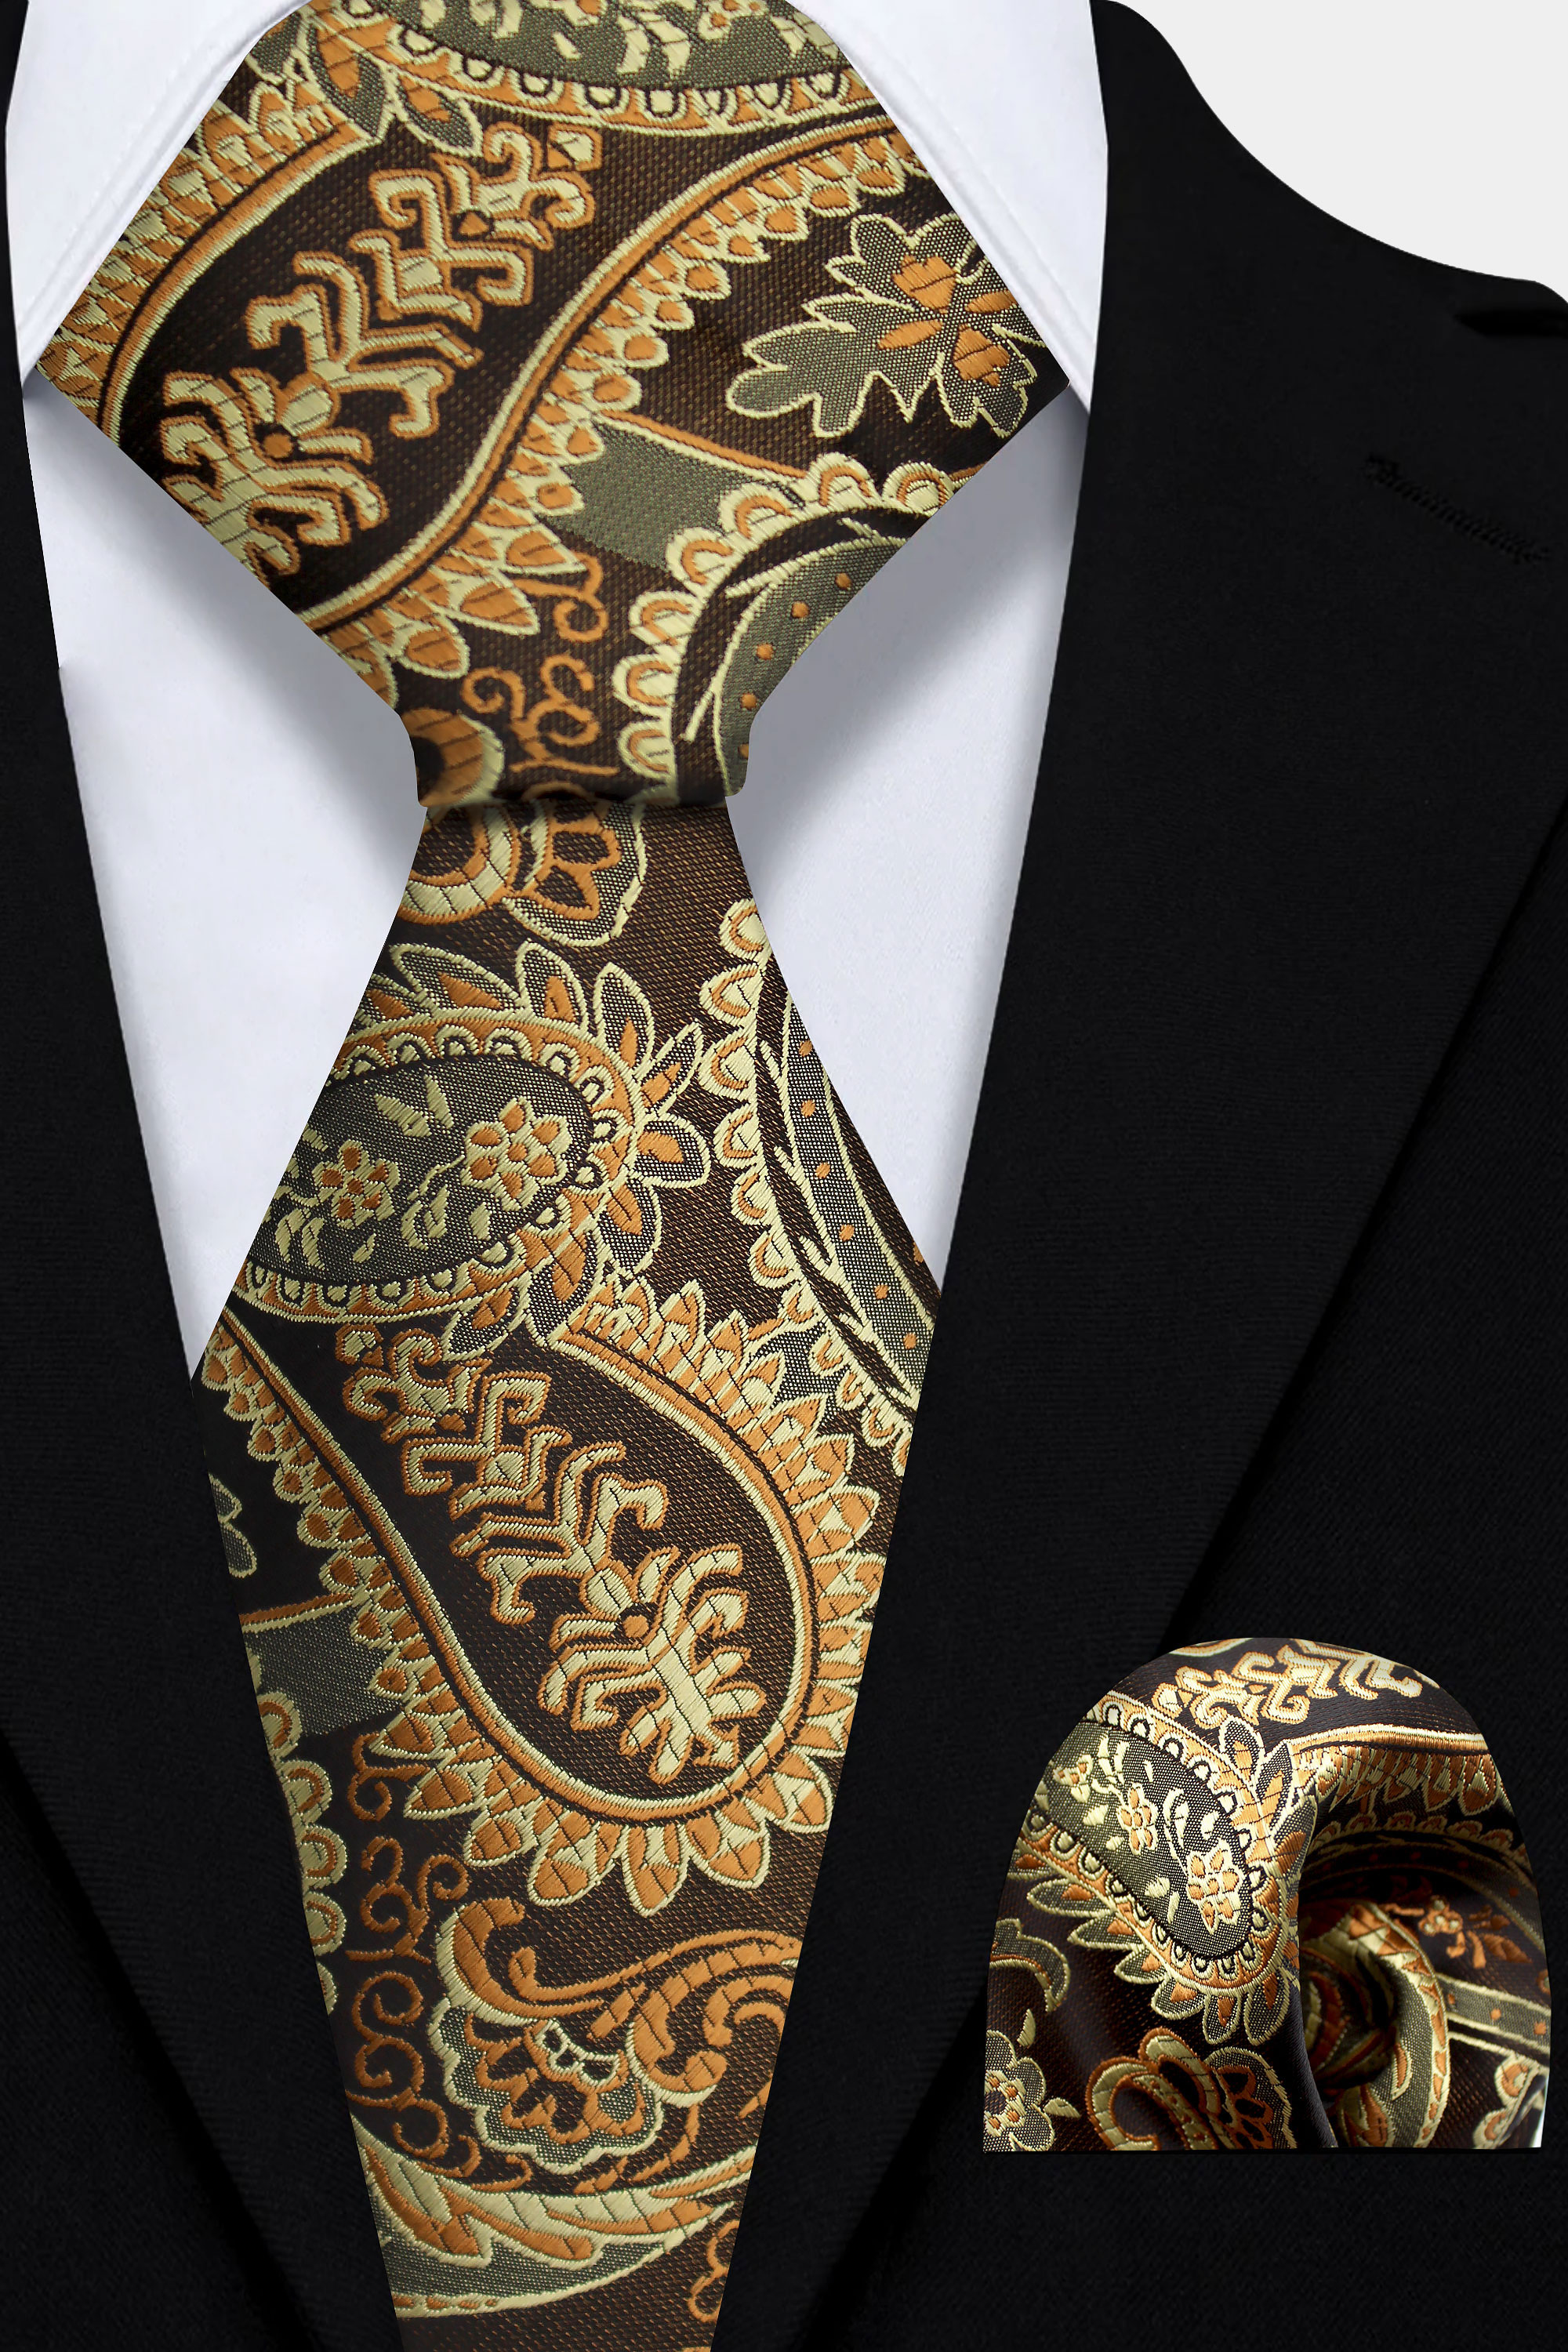 Tan Blazer with Black and White Paisley Pocket Square Outfits (3 ideas &  outfits)